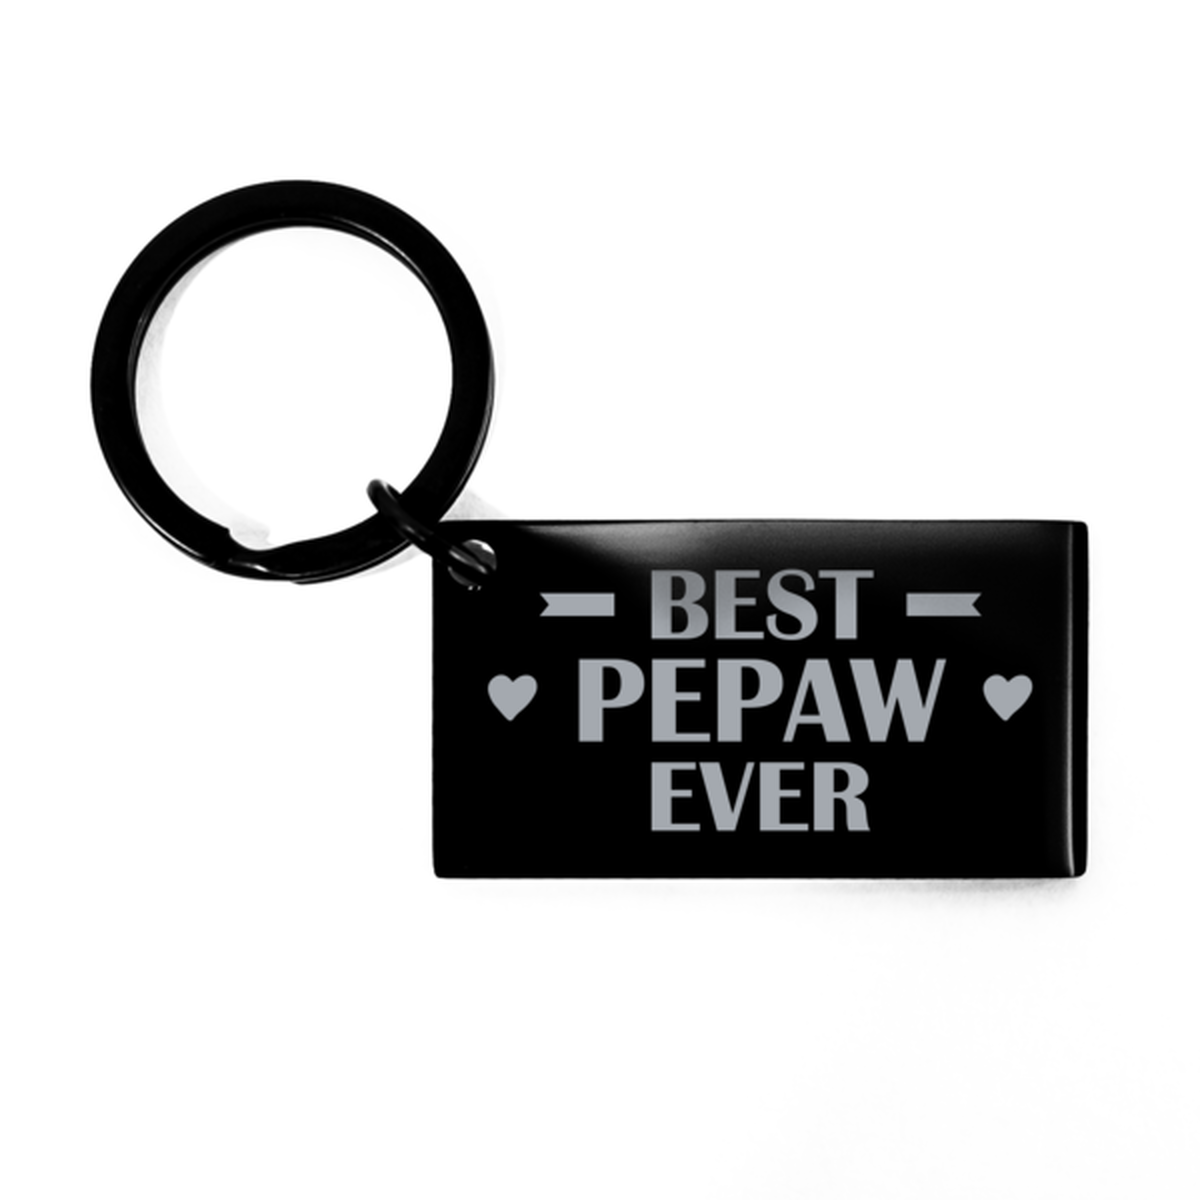 Best Pepaw Ever Pepaw Gifts, Funny Black Keychain For Pepaw, Birthday Engraved Keyring Presents For Men